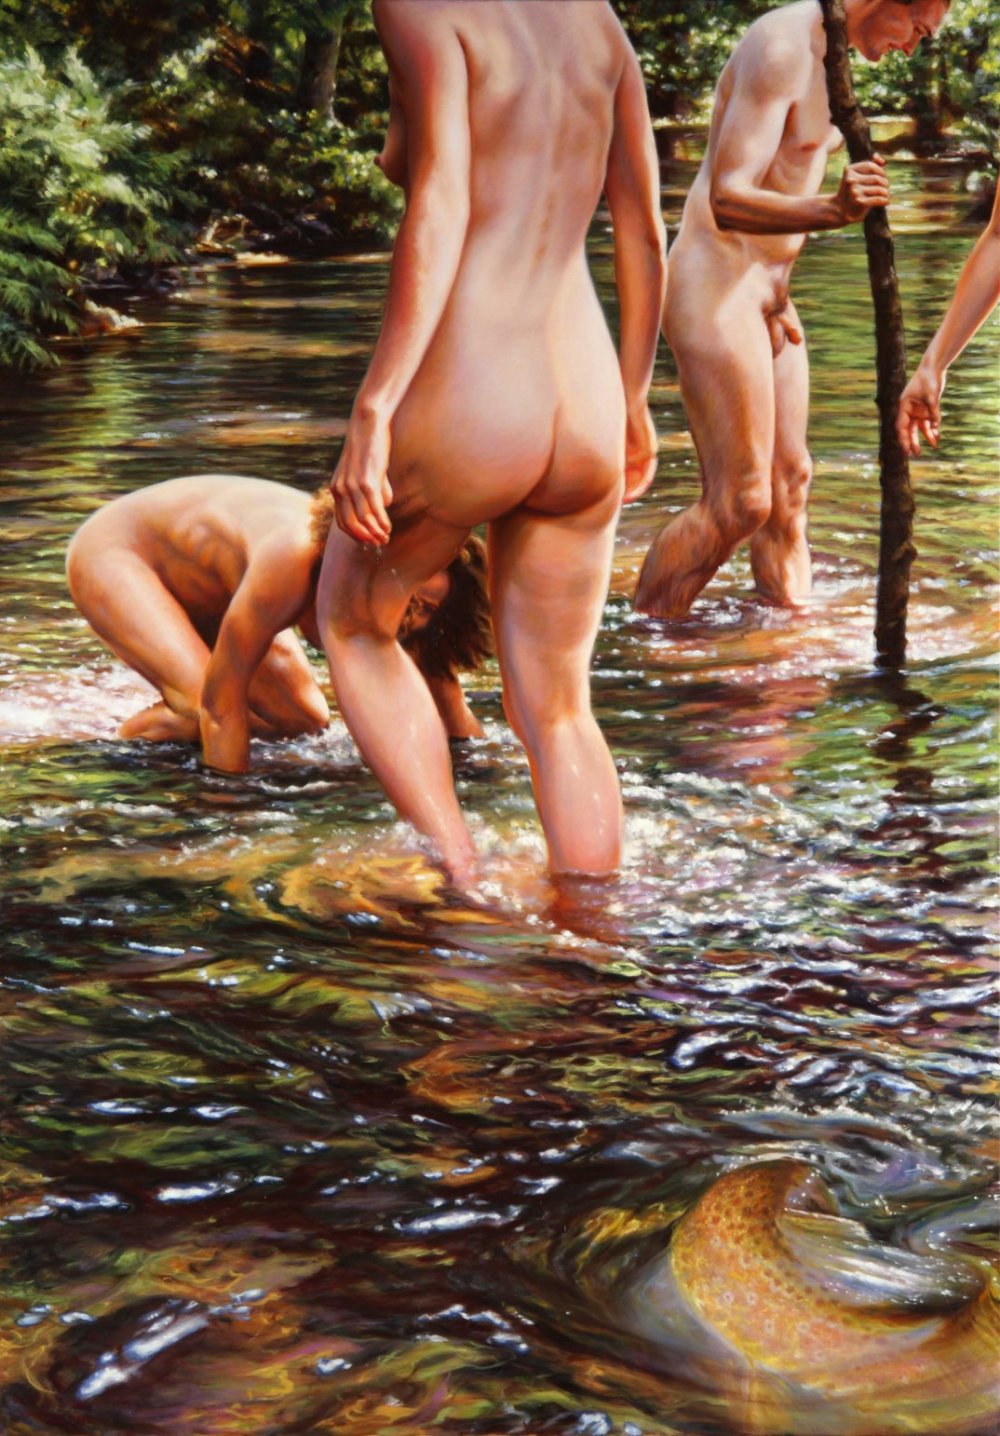 Human Nudity In Its Purest Form In Susannah Martins Paintings 10